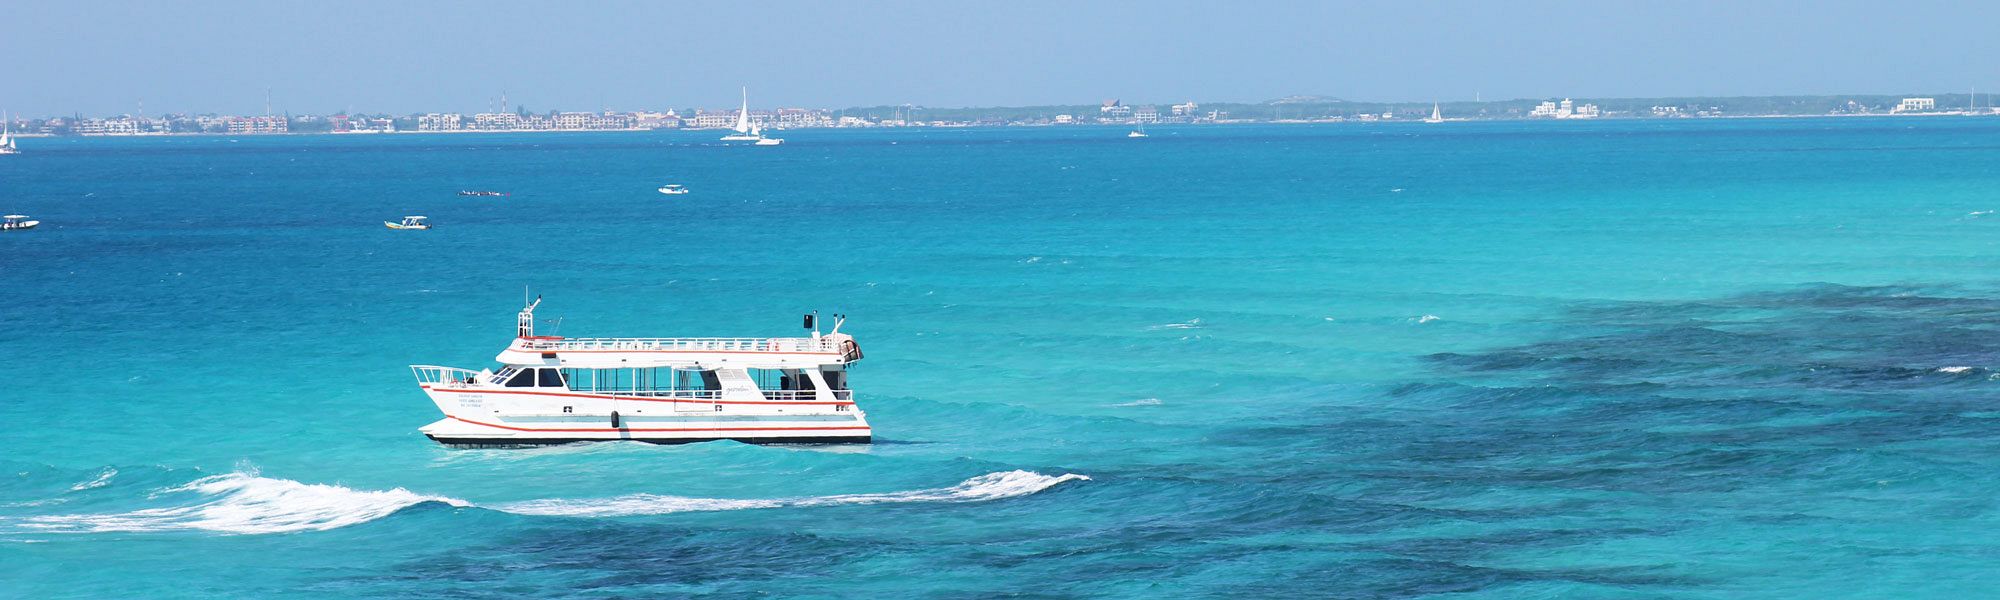 Getting to Isla Mujeres